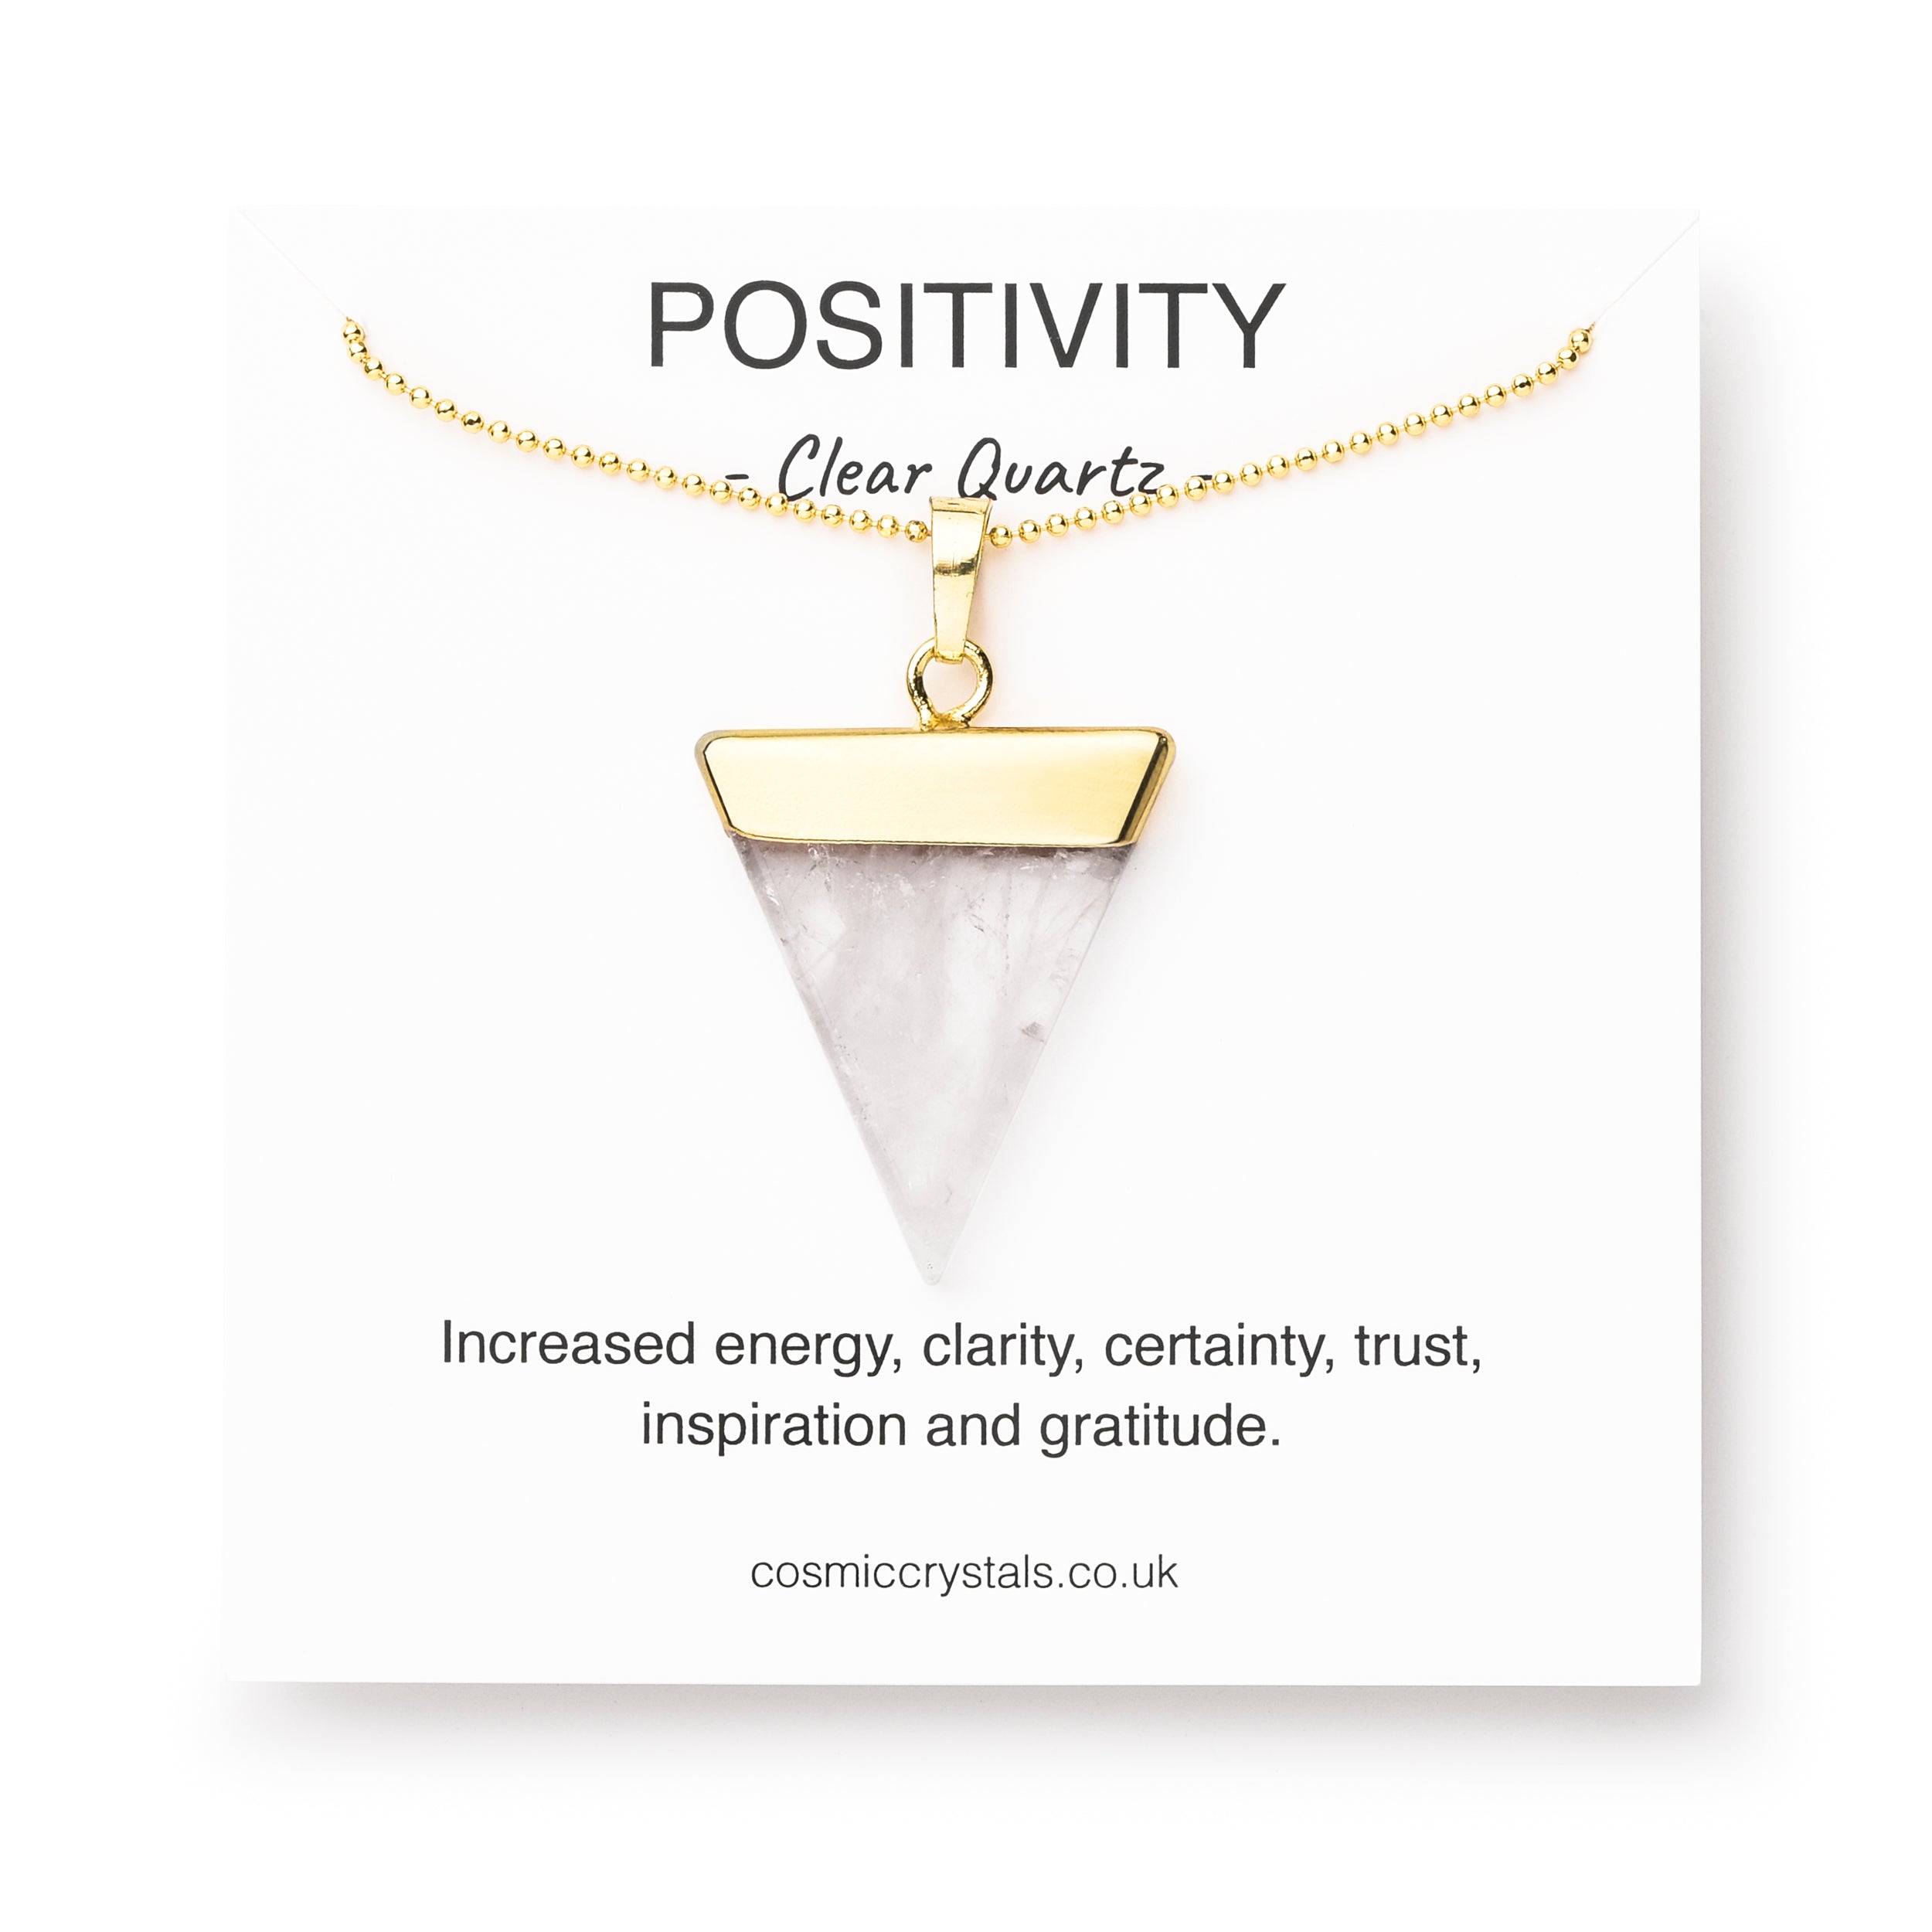 Image of Positivity Triangle, Gold Necklace, Clear Quartz Crystal